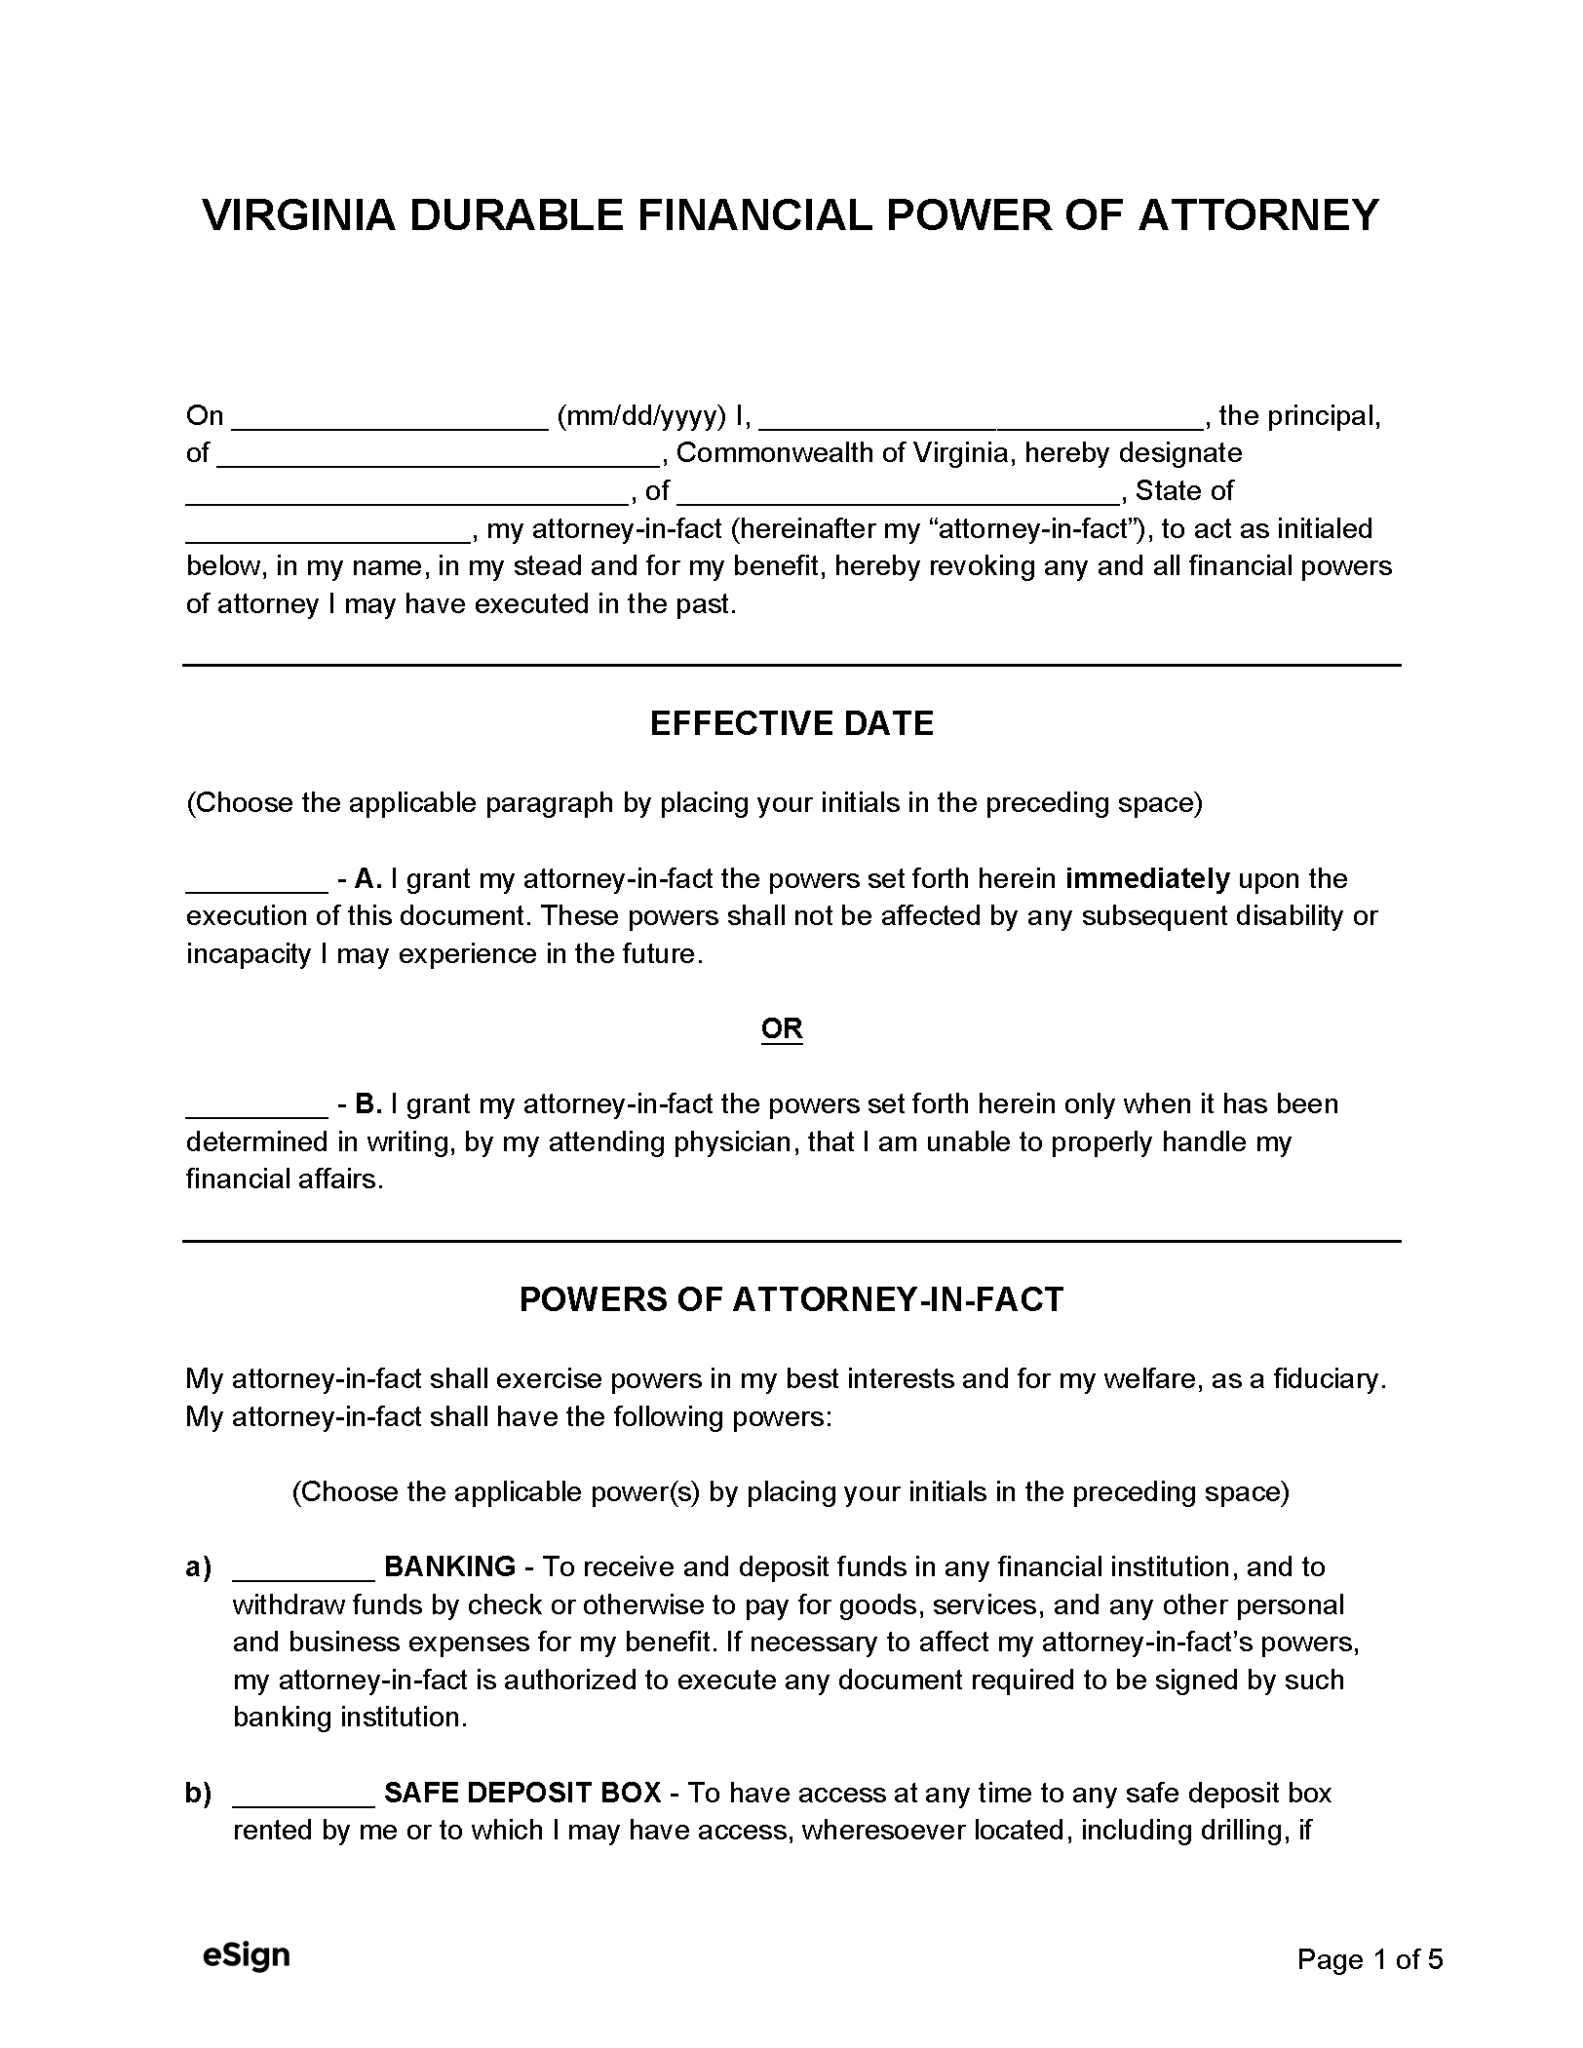 free-virginia-durable-power-of-attorney-form-pdf-word